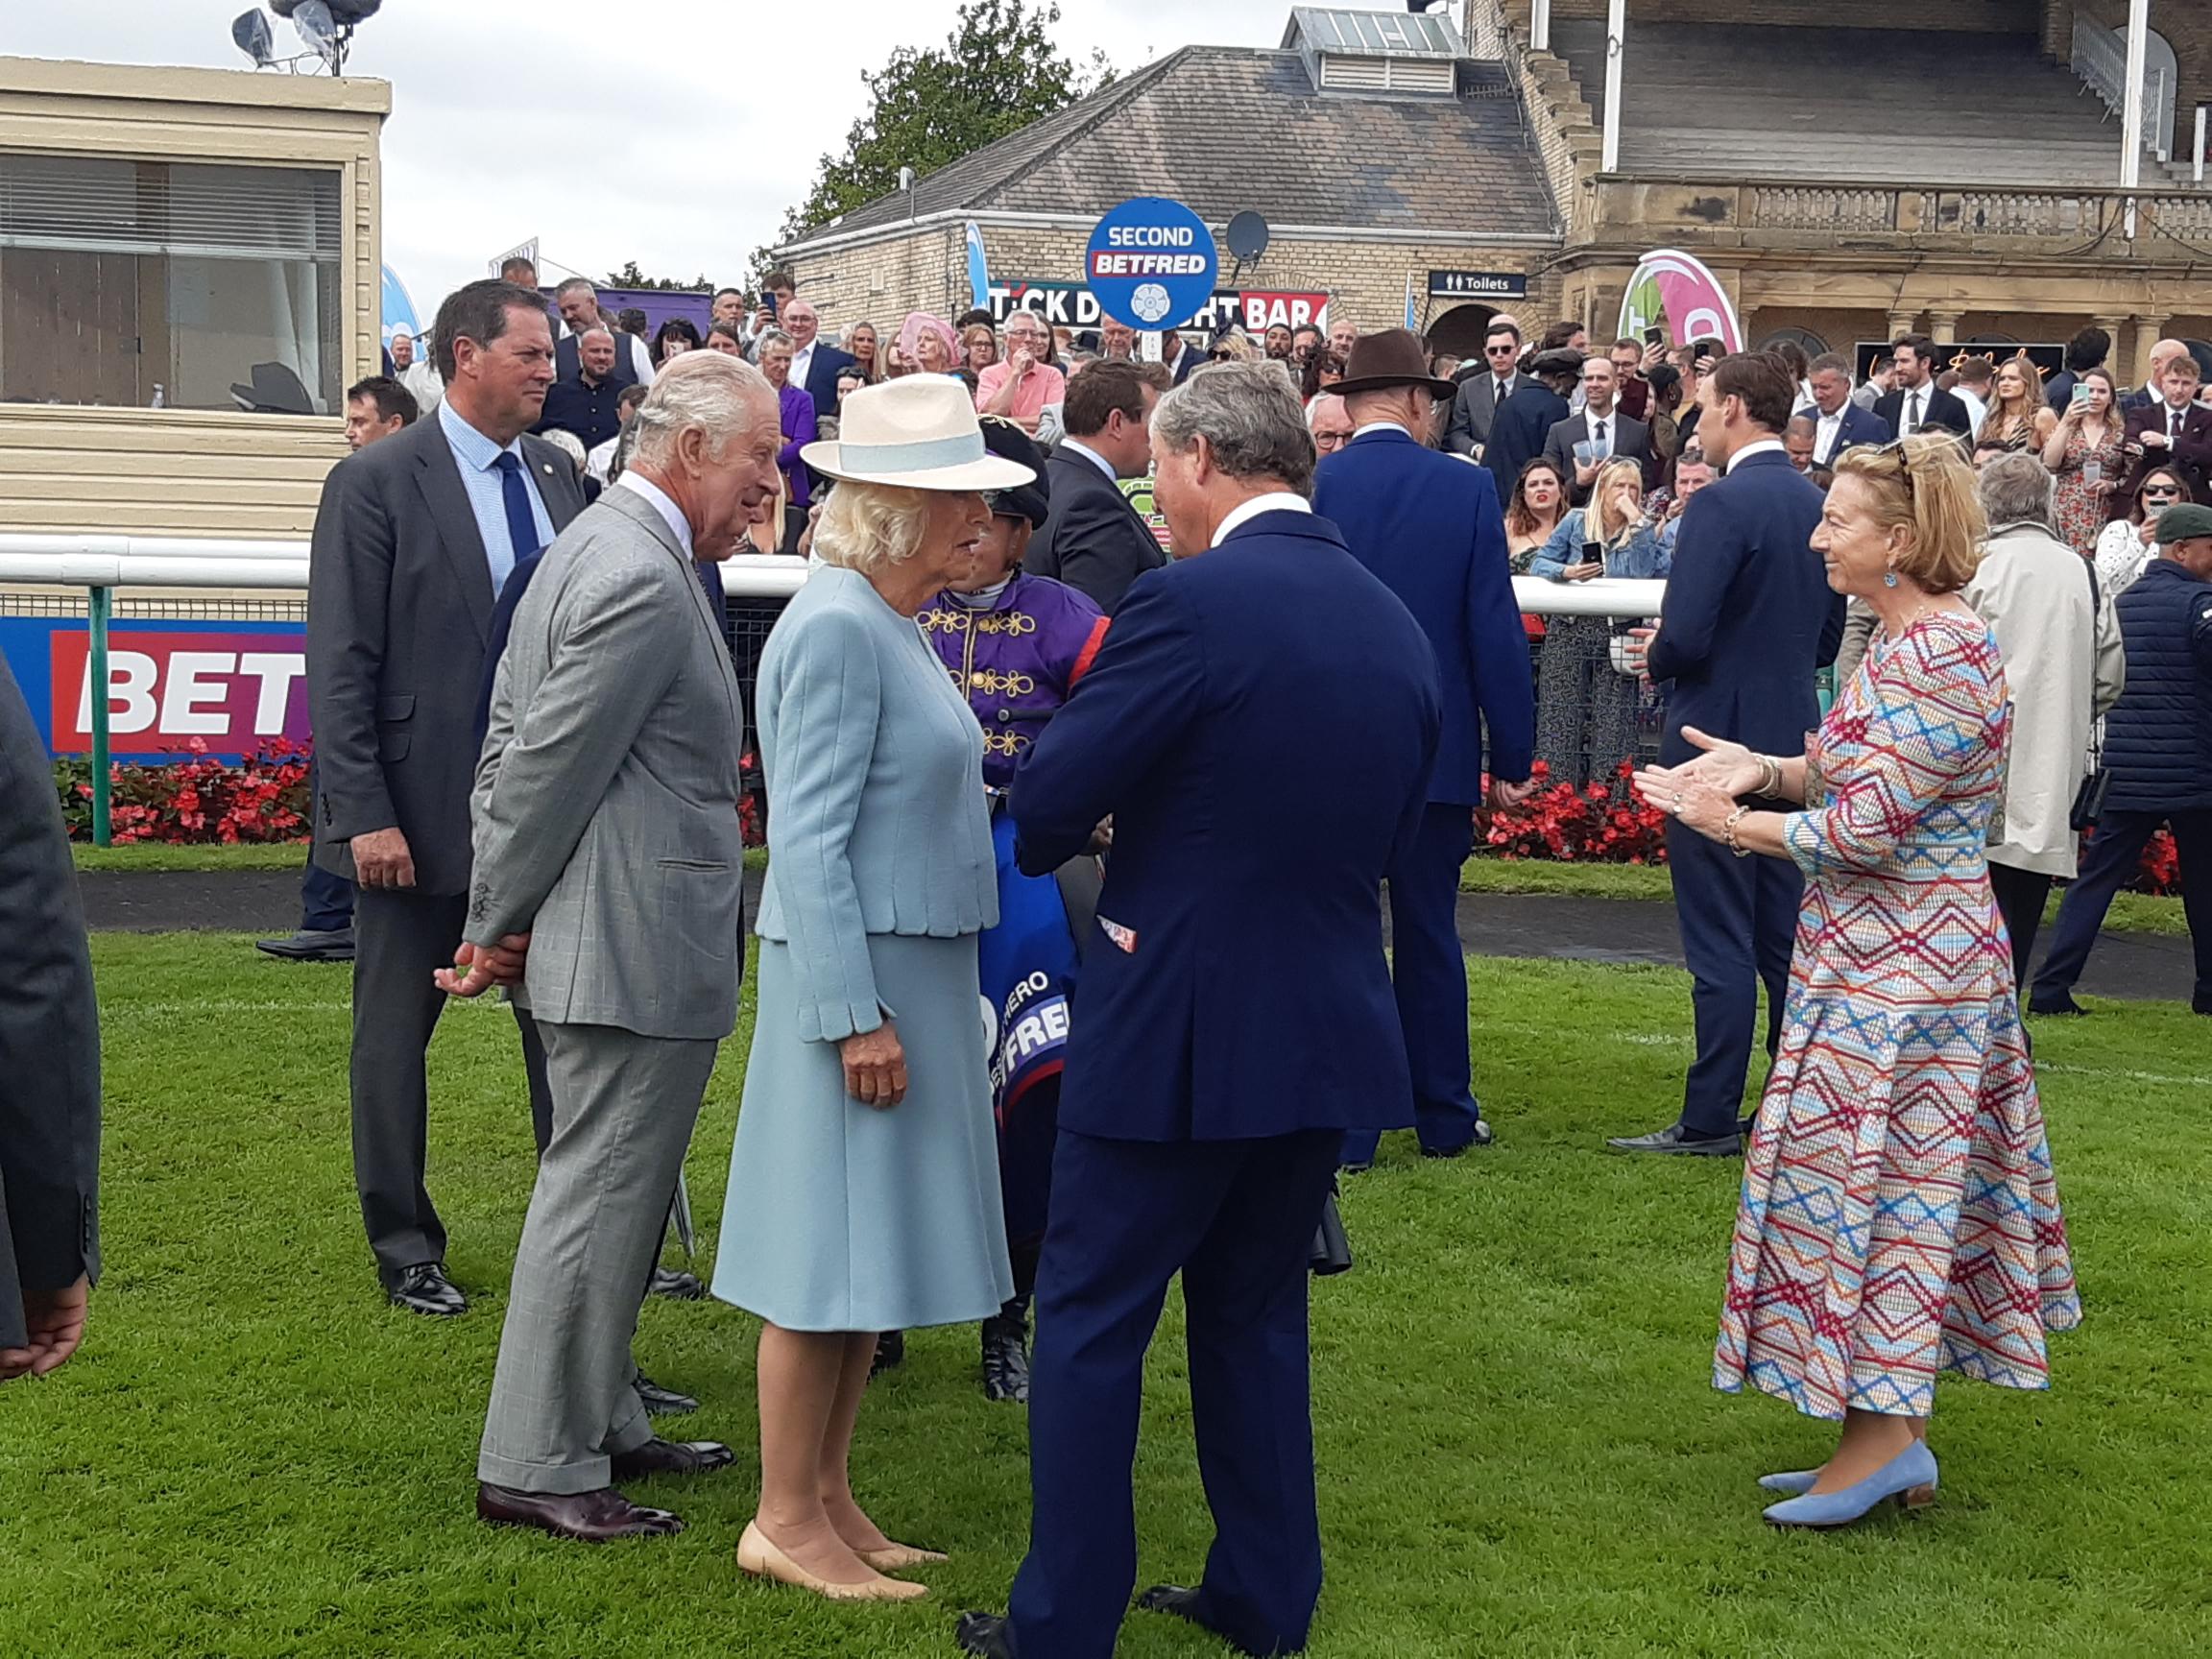 William Haggas explains to the King and Queen where the race was won and lost